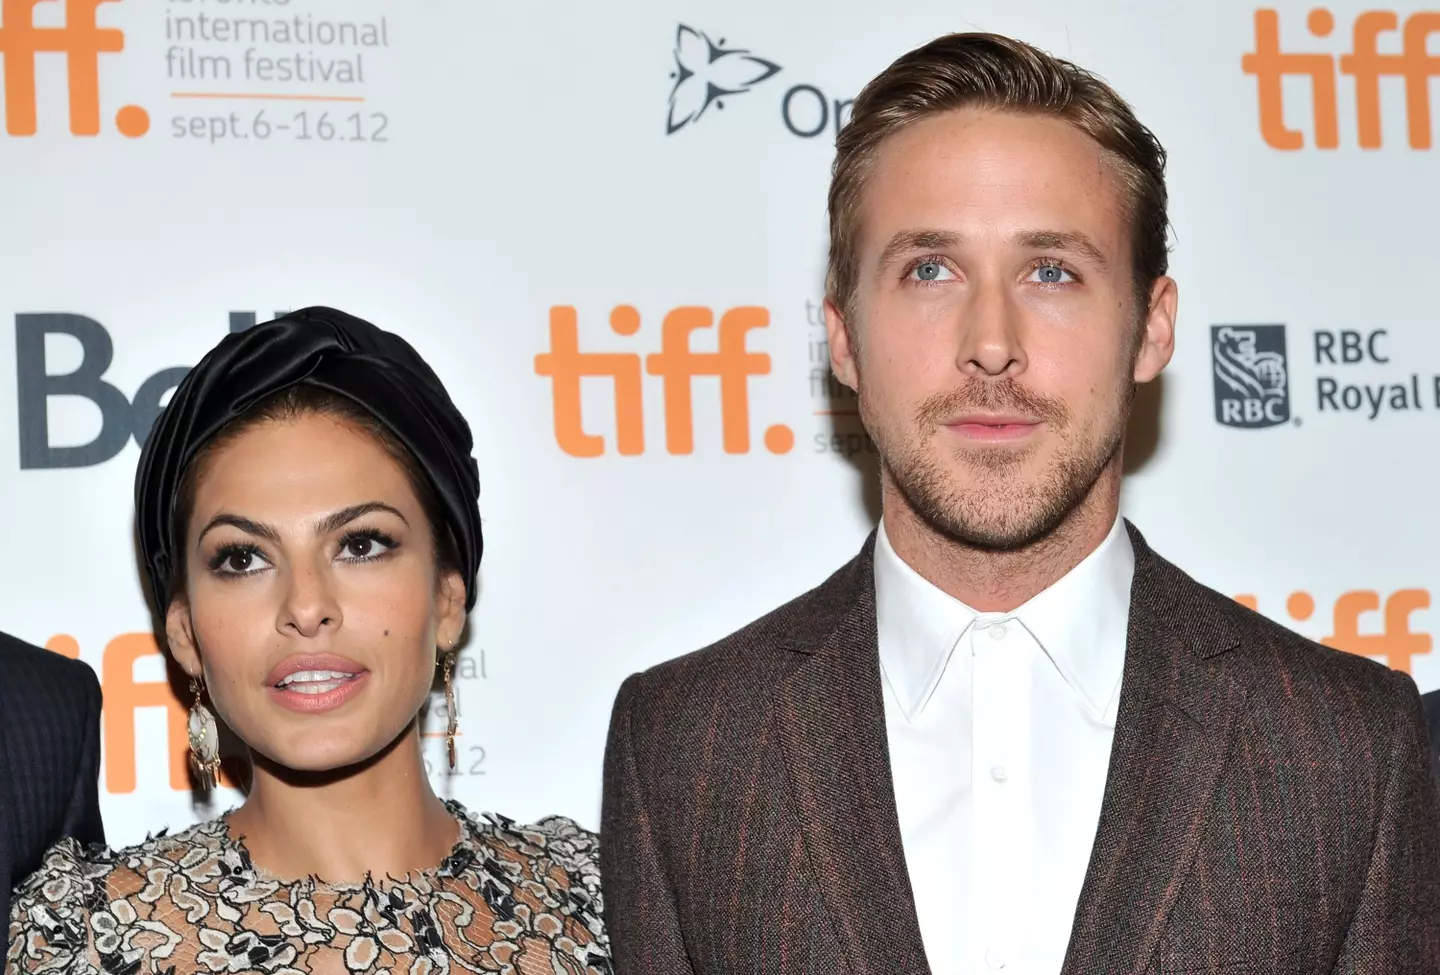 Ryan Gosling and Eva Mendes haven't appeared on the red carpet together since 2012.